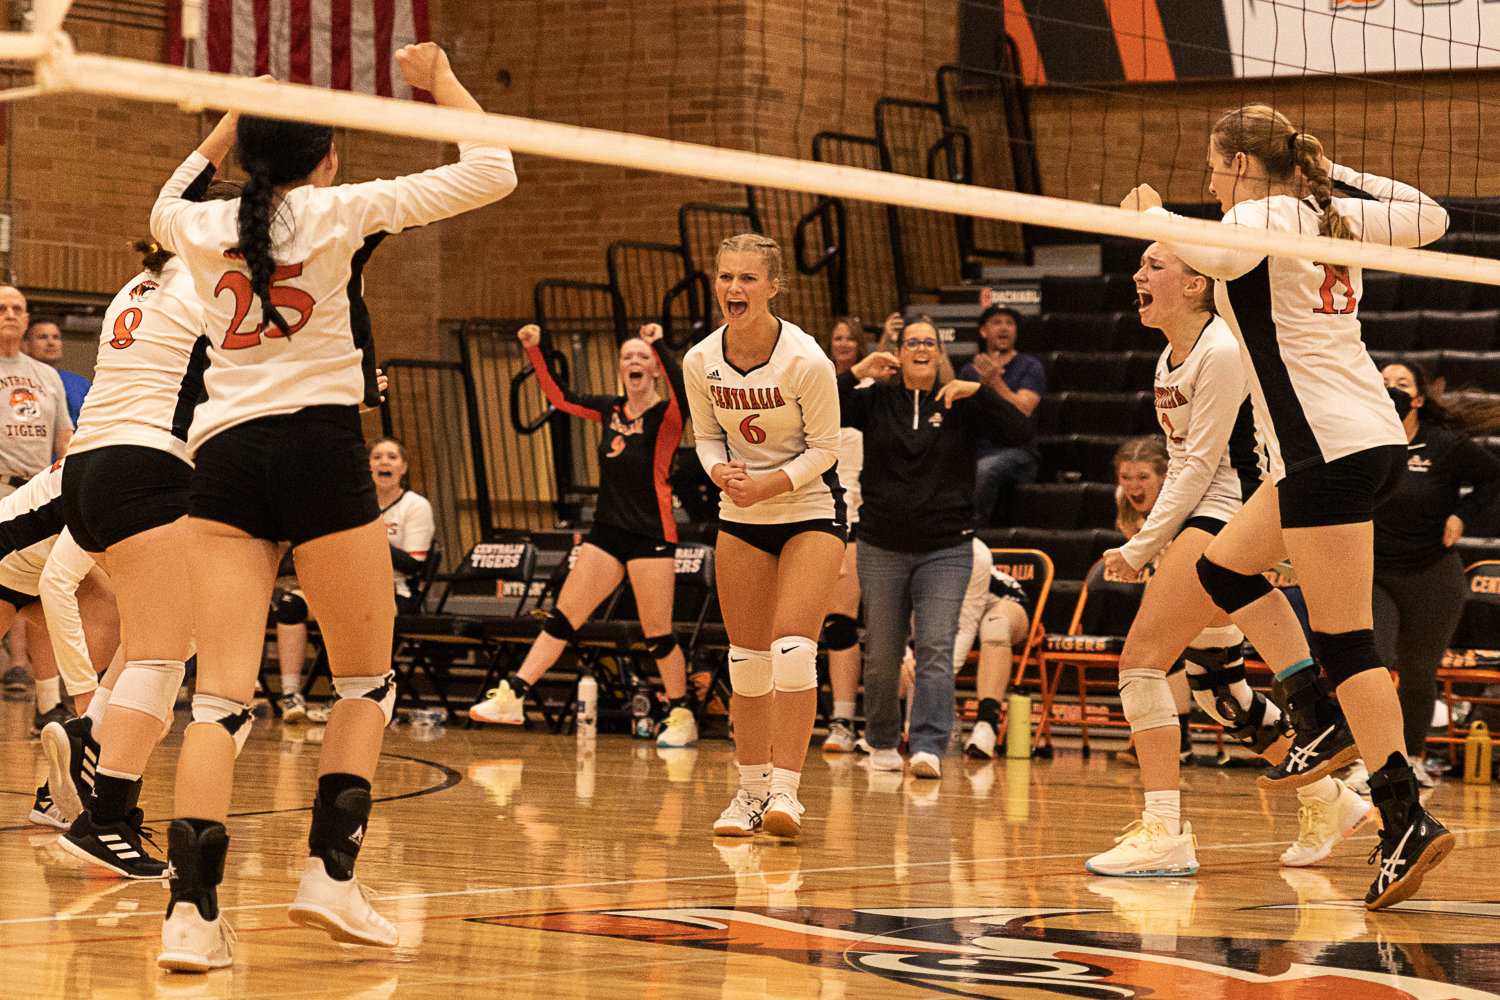 The Centralia volleyball team celebrates winning a set against Heritage Sept. 8.